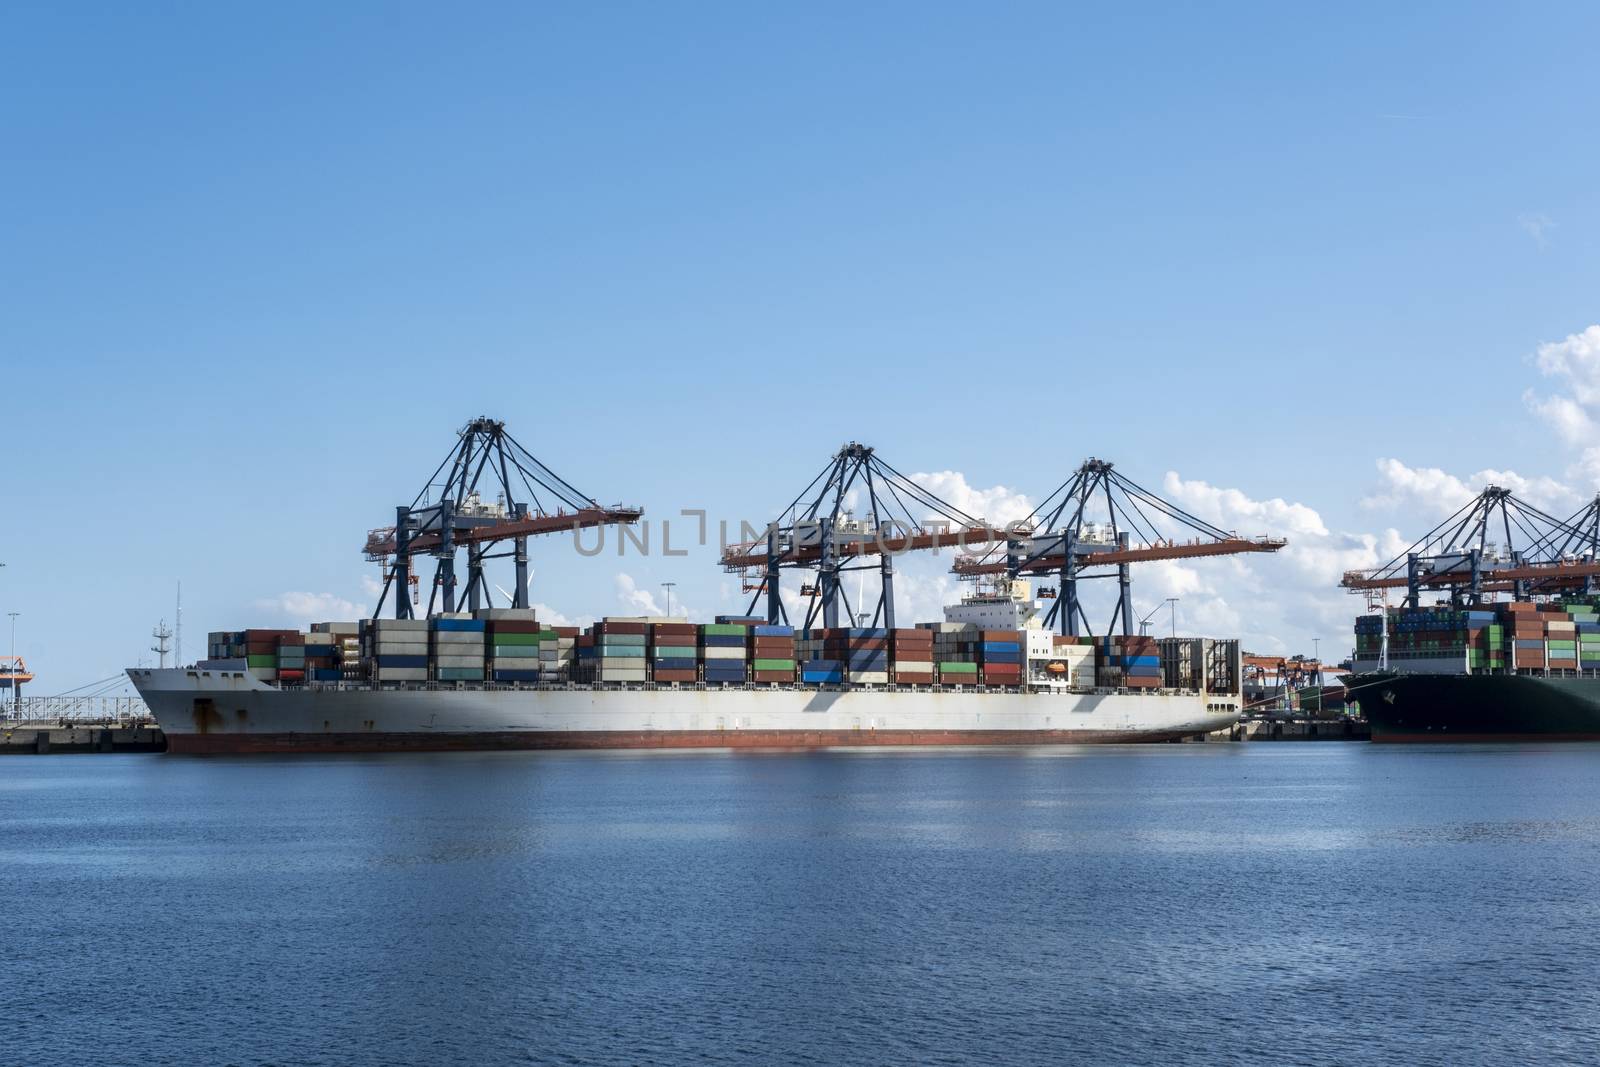 Logistics and transportation of Container Cargo ship and Cargo plane with working crane bridge in shipyard, logistic import export and transport industry background